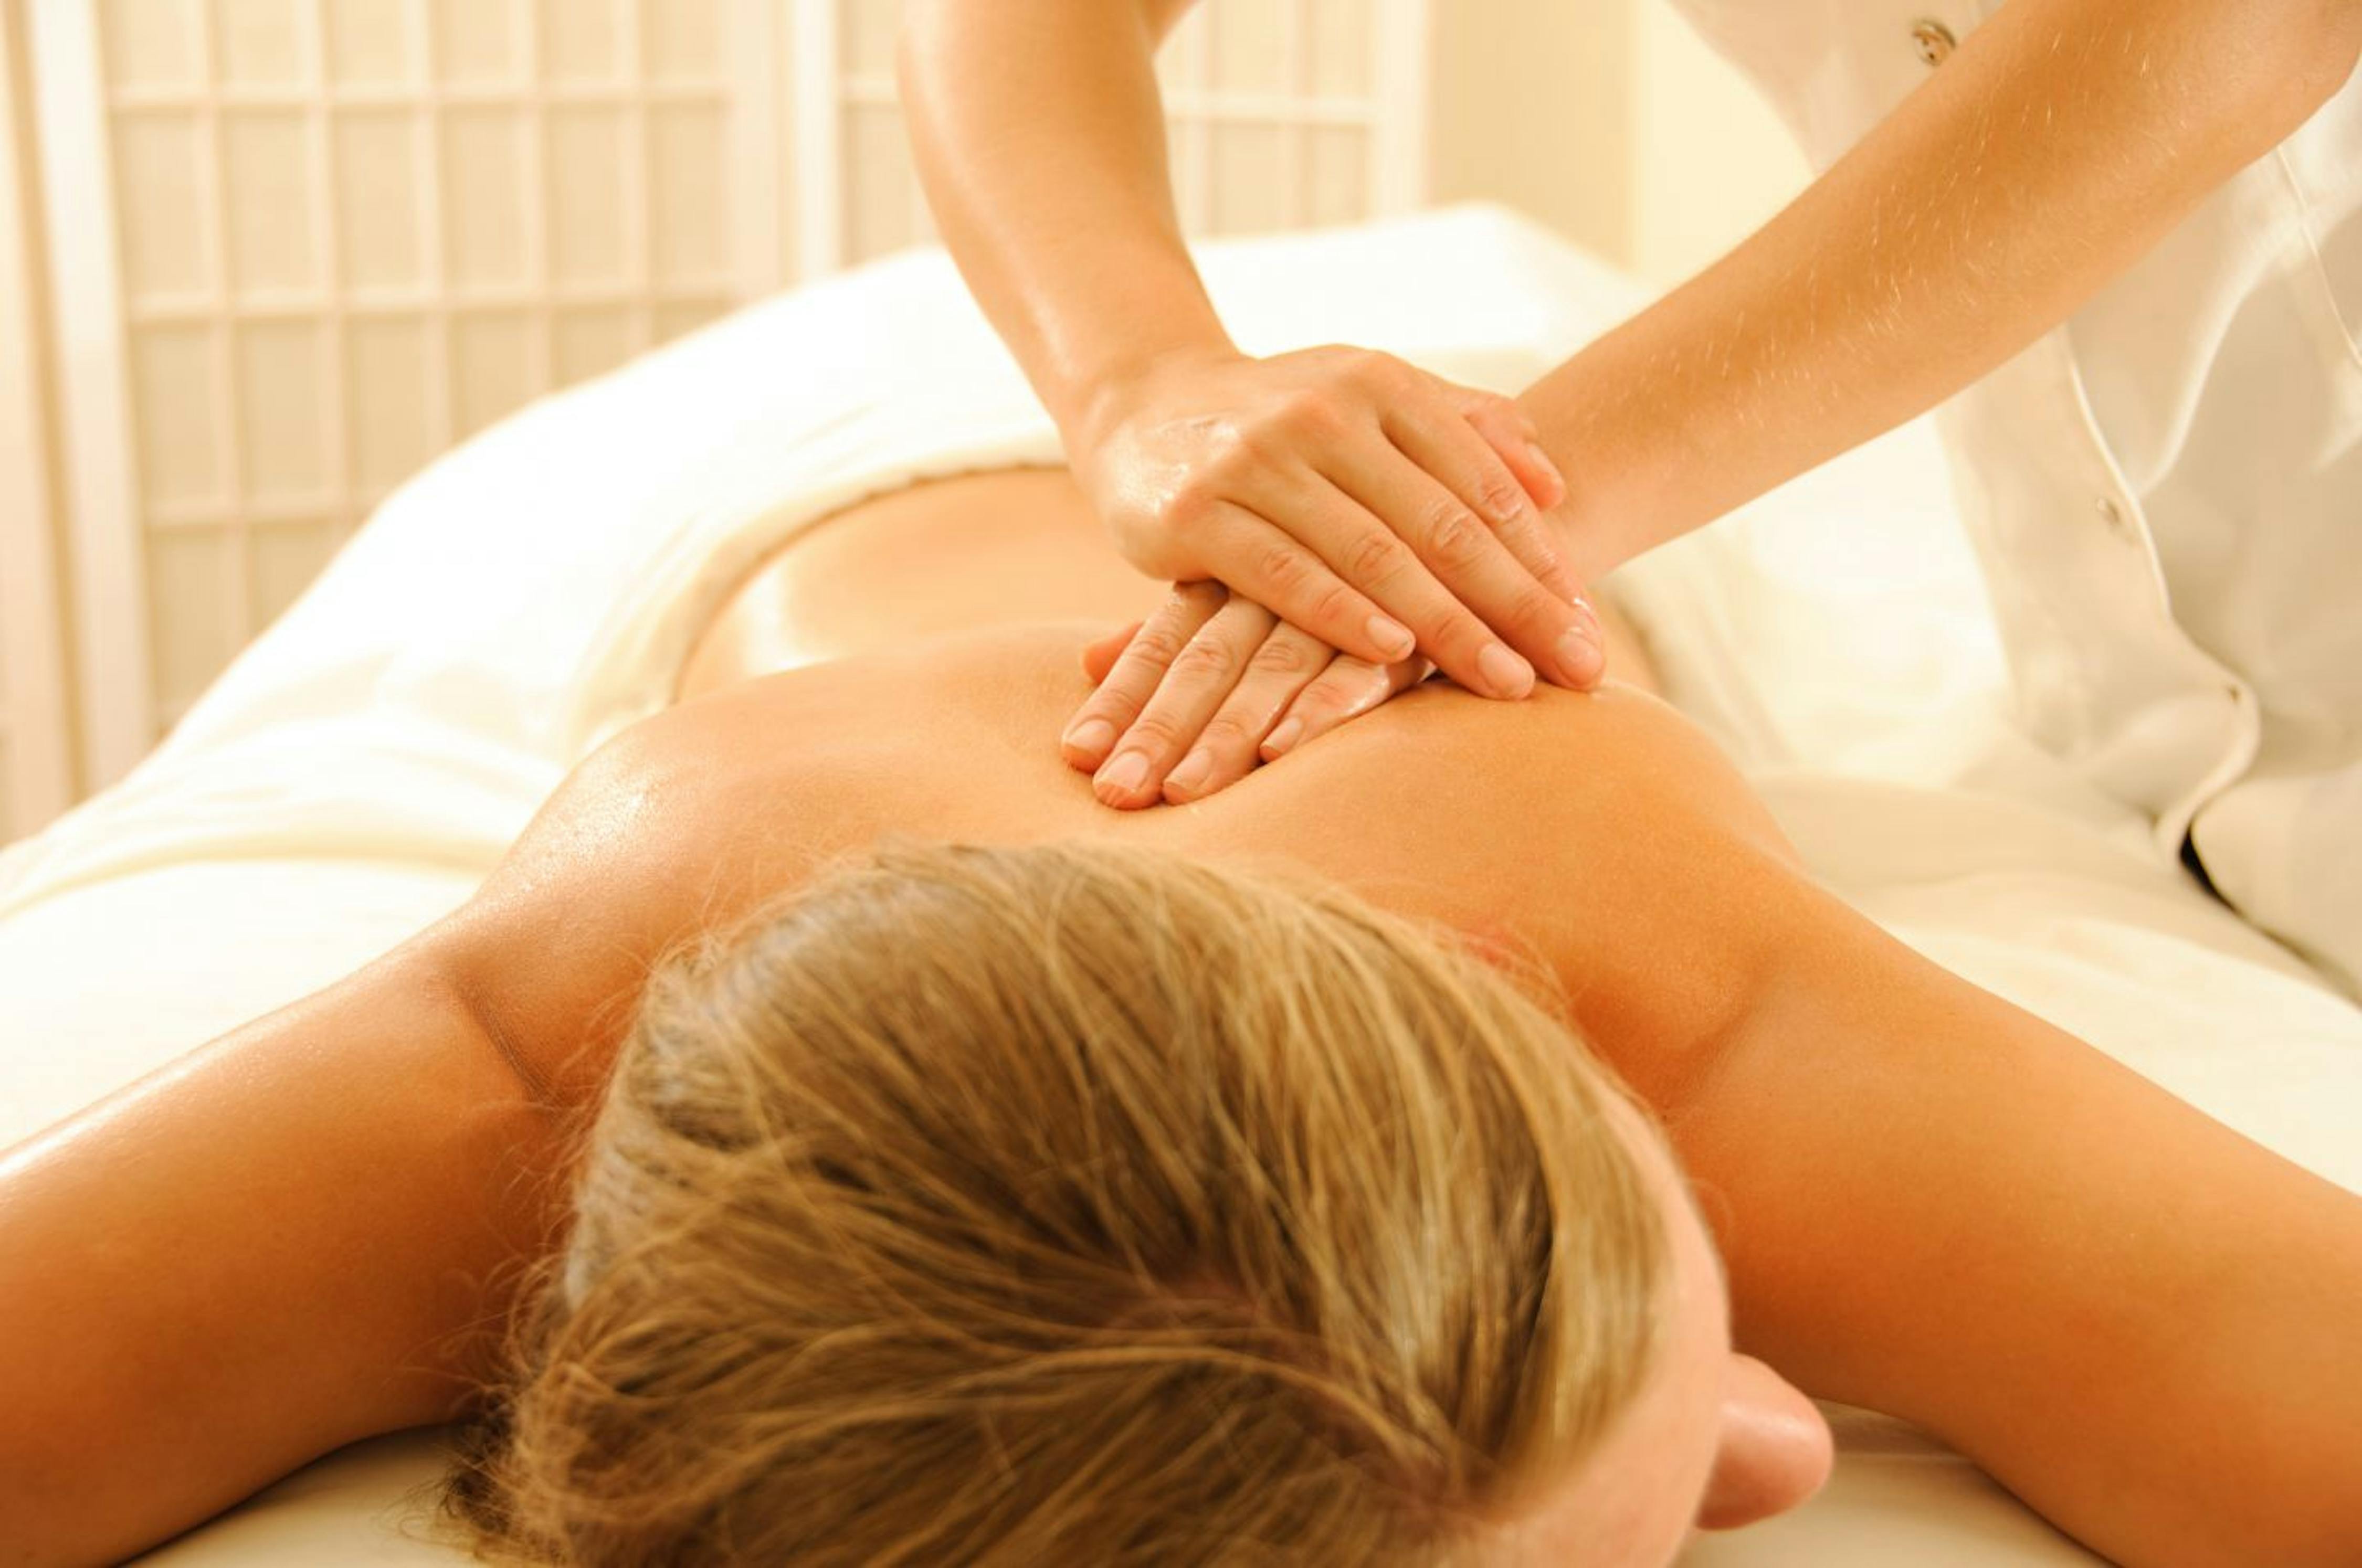 4 things massage therapists wish clients would understand - Versum